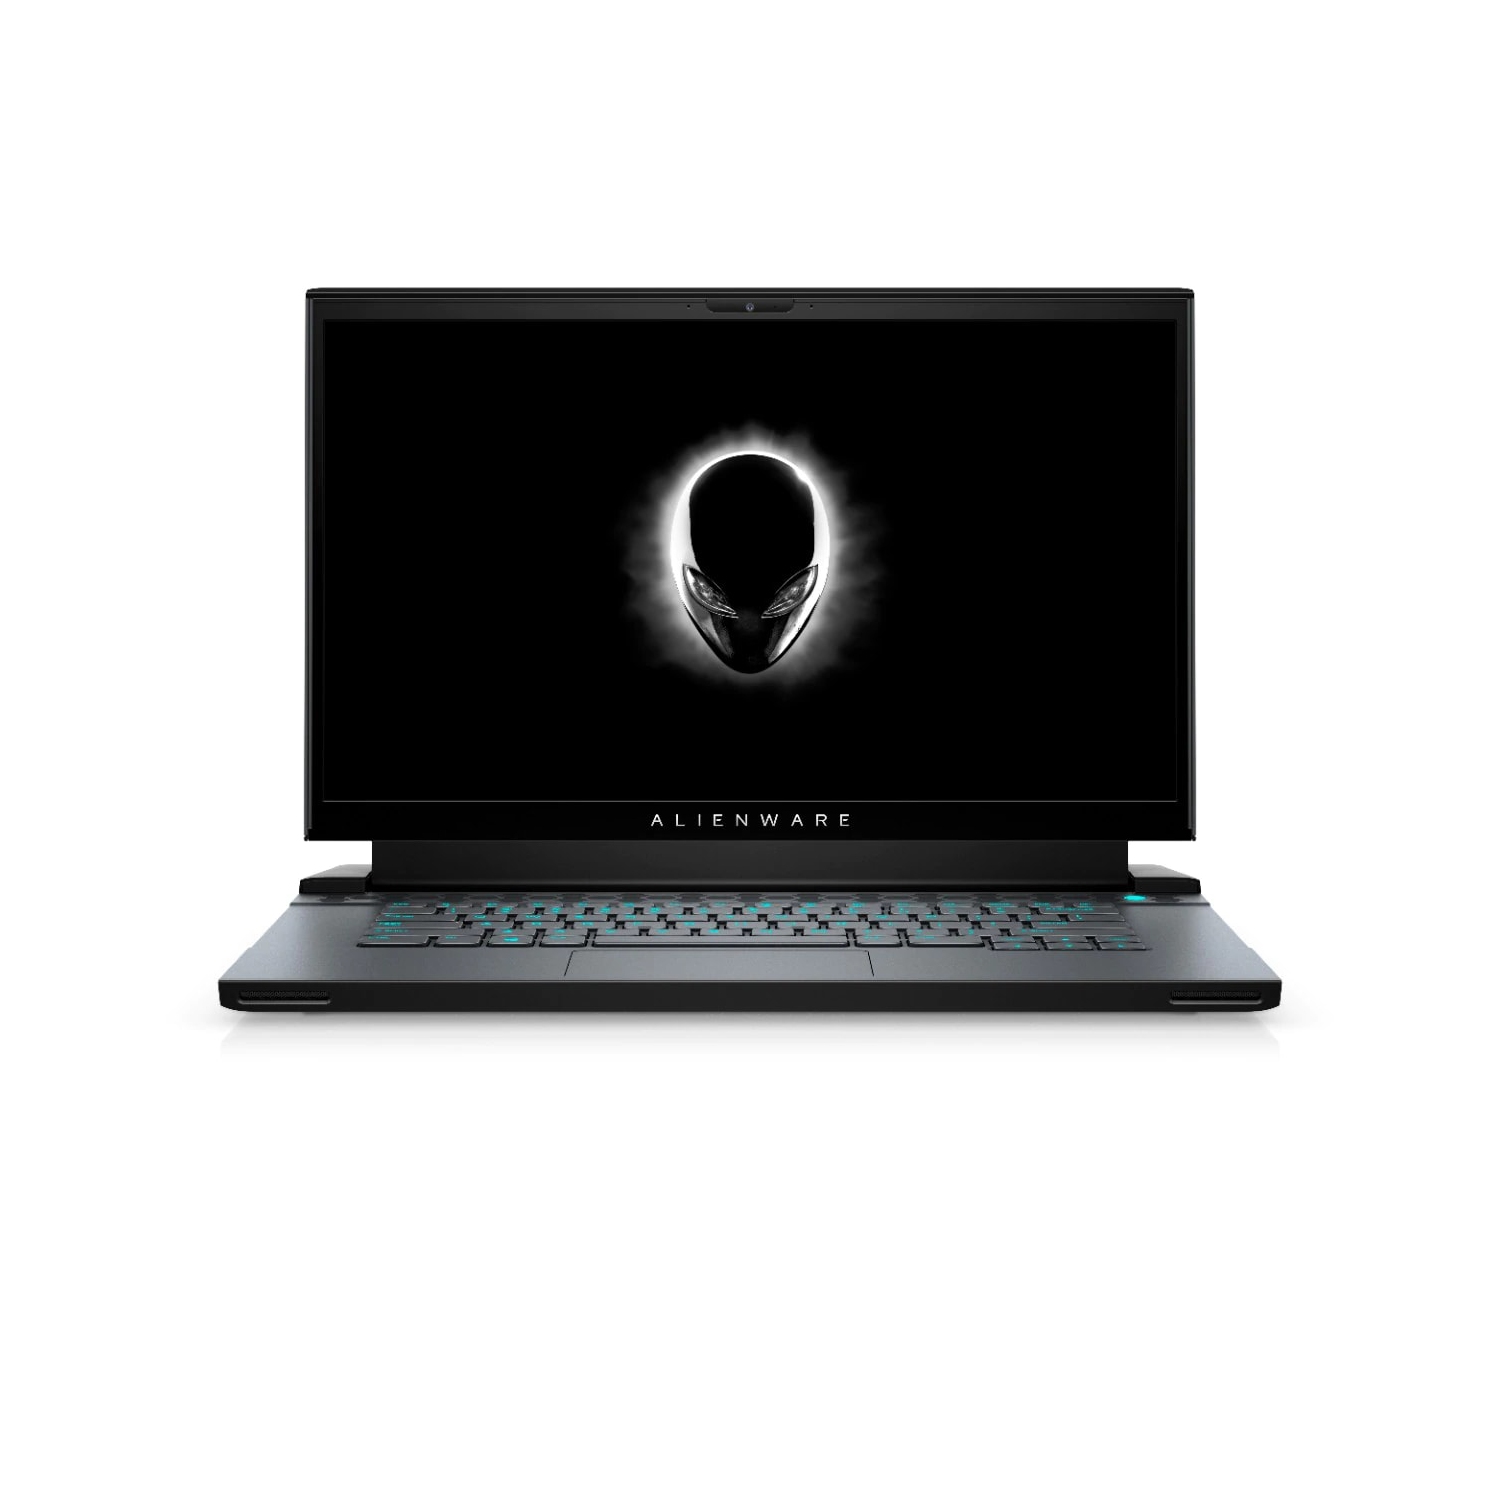 Refurbished (Excellent) - Dell Alienware m15 R4 Gaming Laptop (2021), 15.6" FHD, Core i7, 512GB SSD, 16GB RAM, RTX 3070, 8 Cores @ 5 GHz, 10th Gen CPU Certified